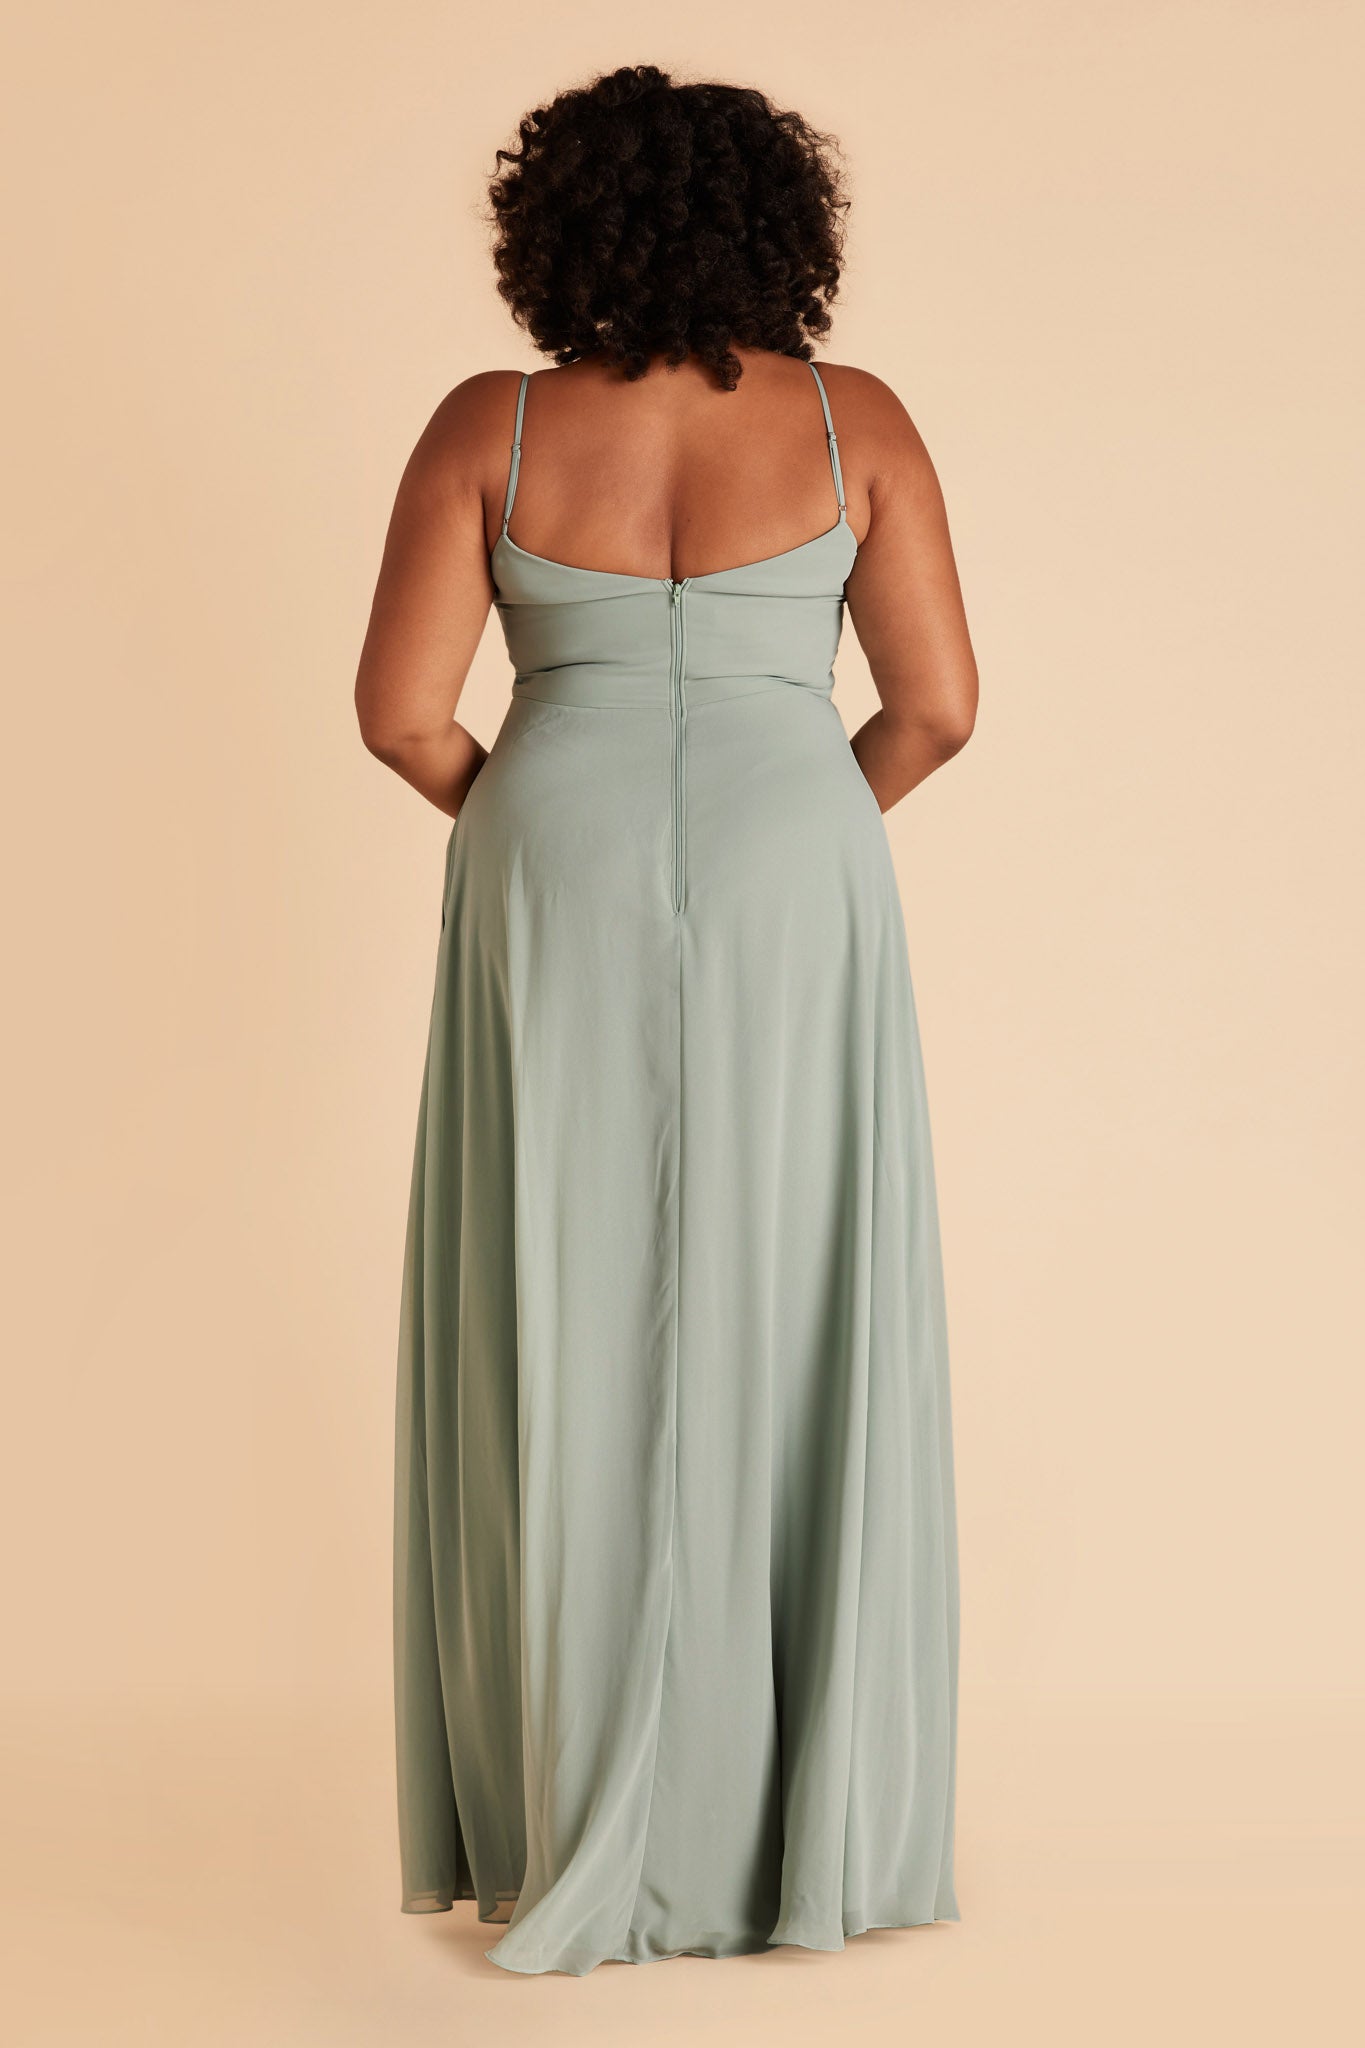 Back view of the floor-length Devin Convertible Plus Size Bridesmaid Dress in sage chiffon displays adjustable spaghetti straps and an open back with a slight v-cut just below the shoulder blades.